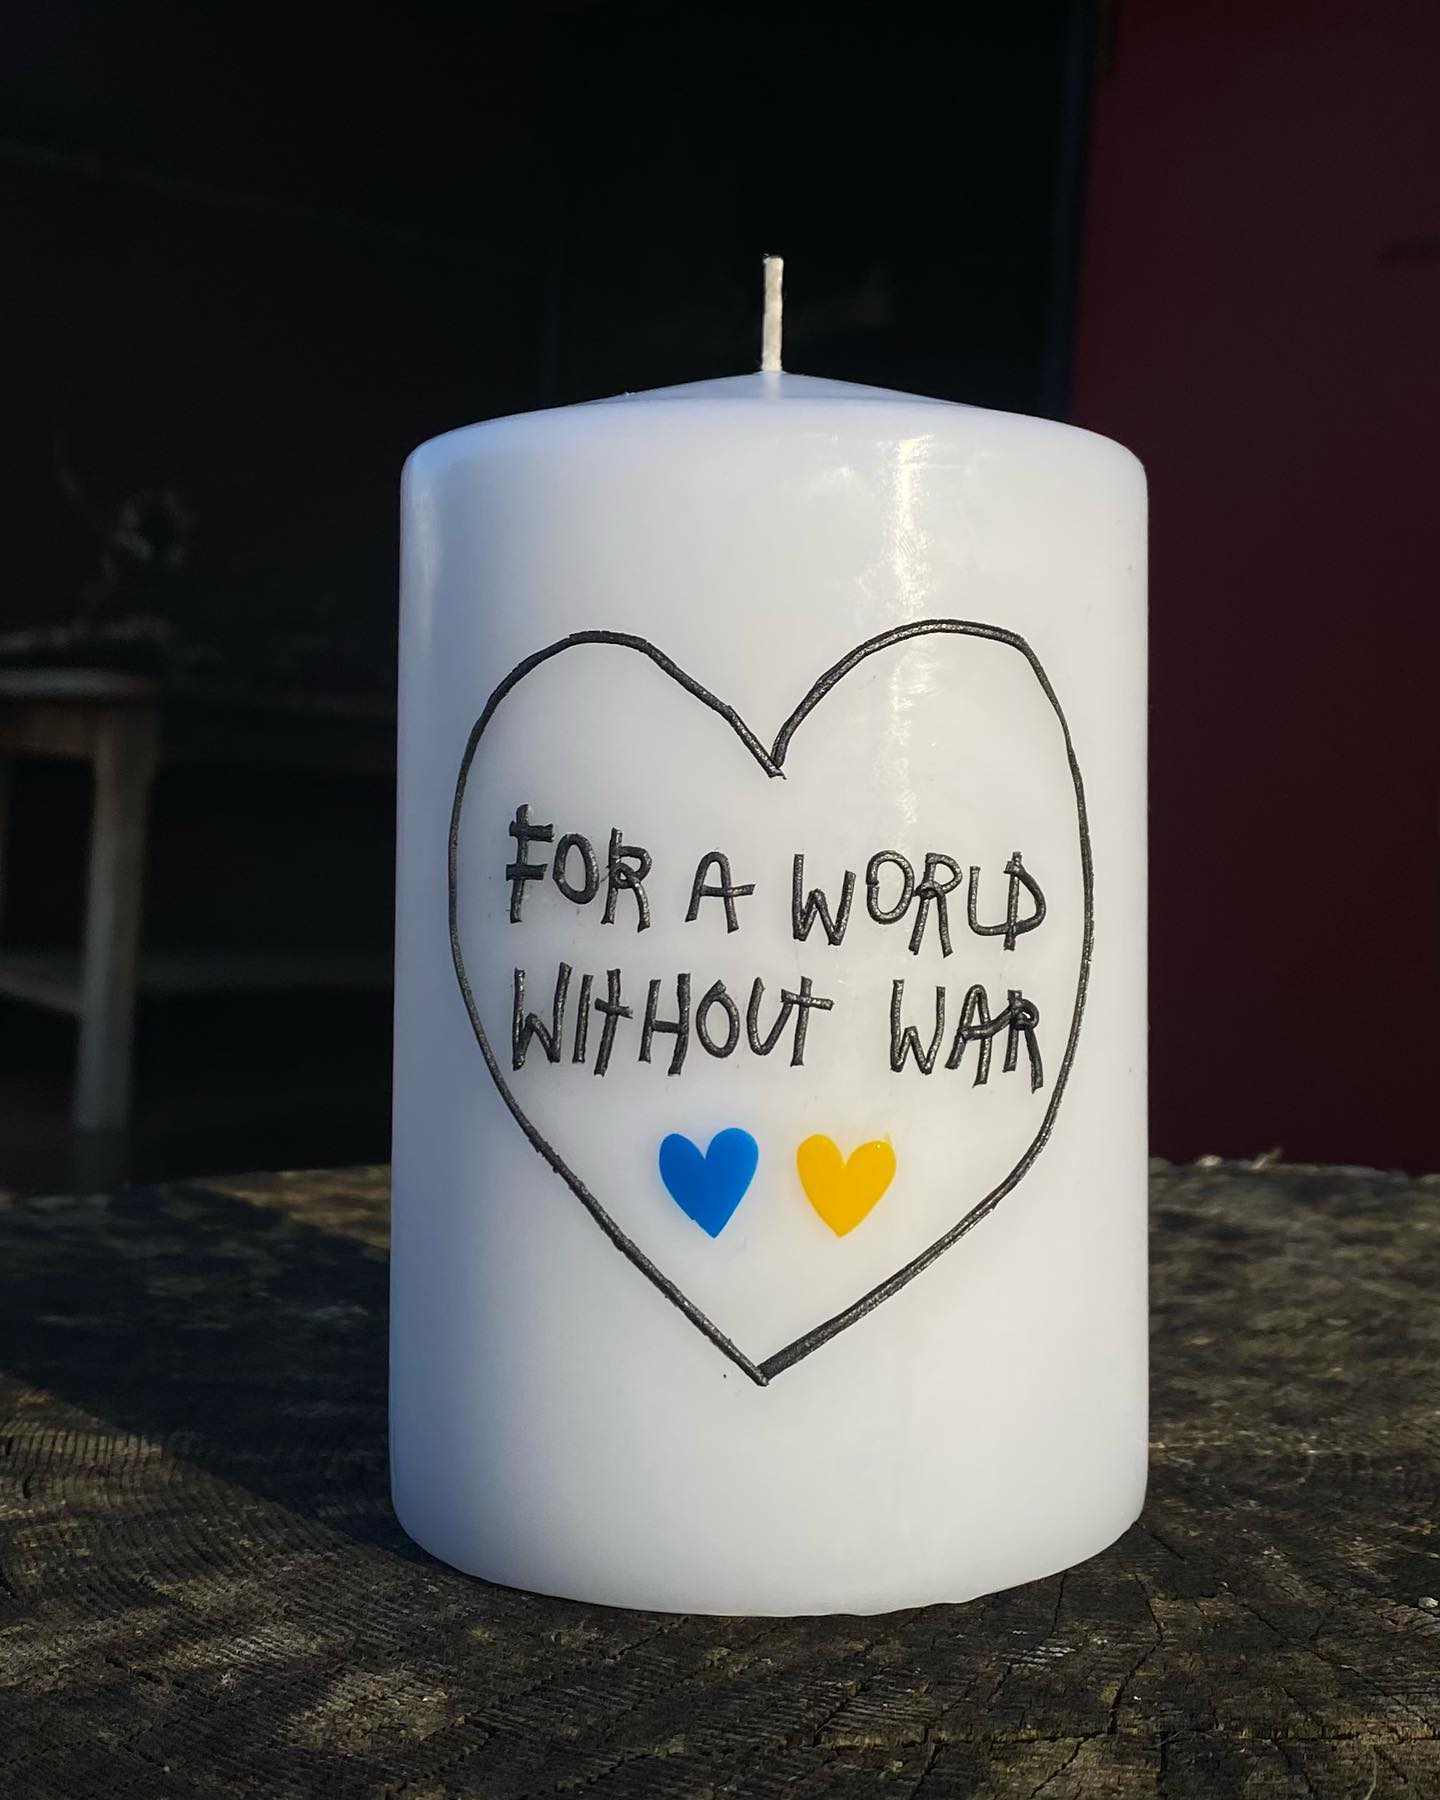 For a world without war 🕊
💙💛
#foraworldwithoutwar